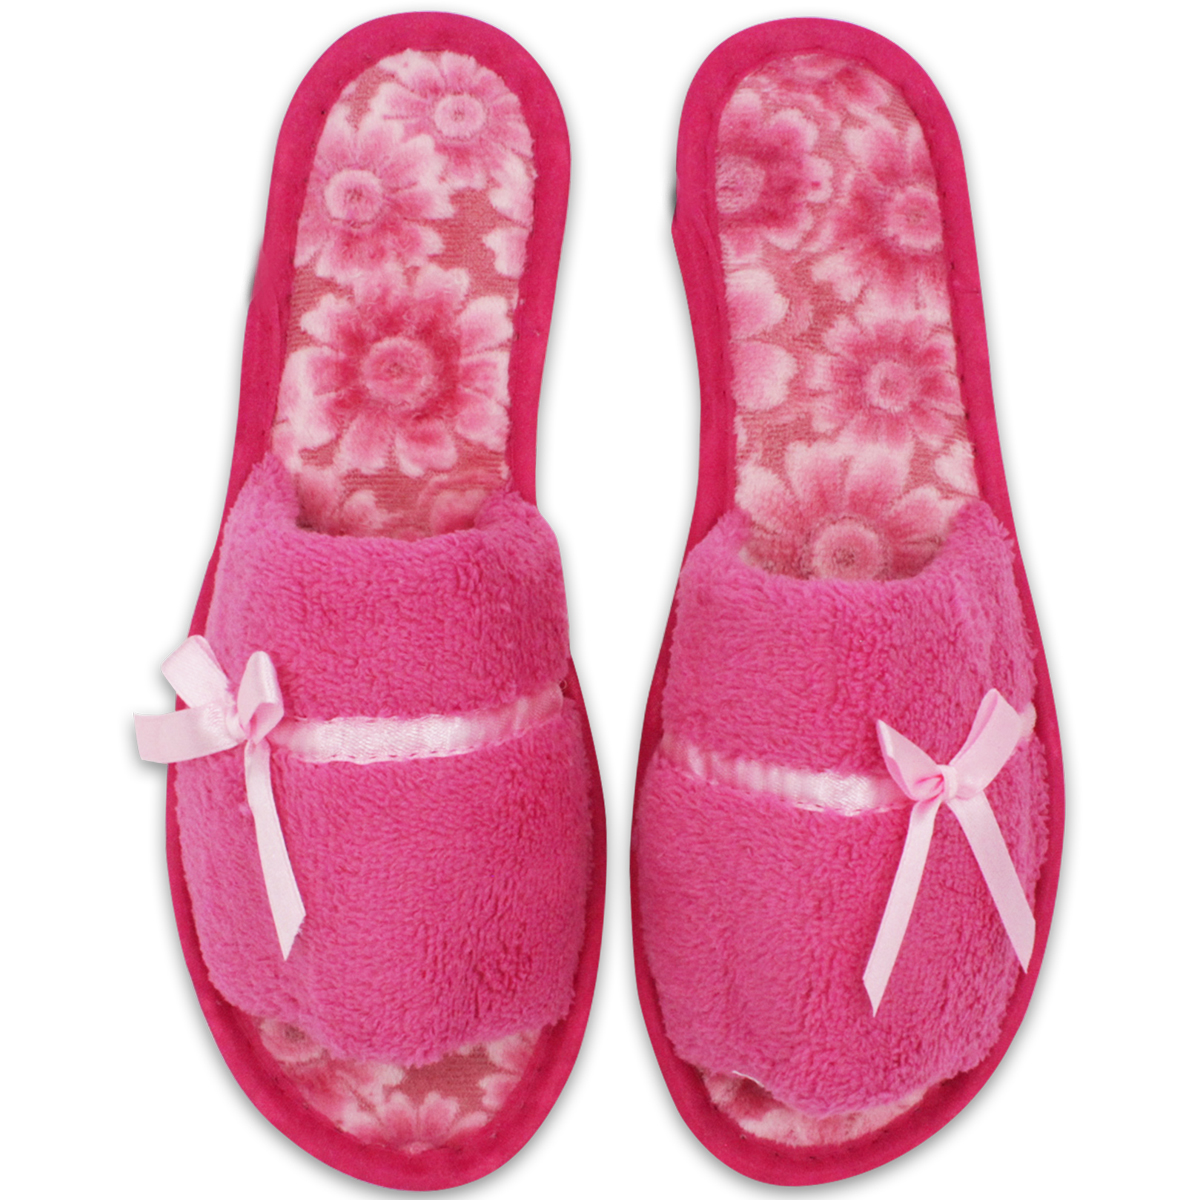 terry cloth house slippers